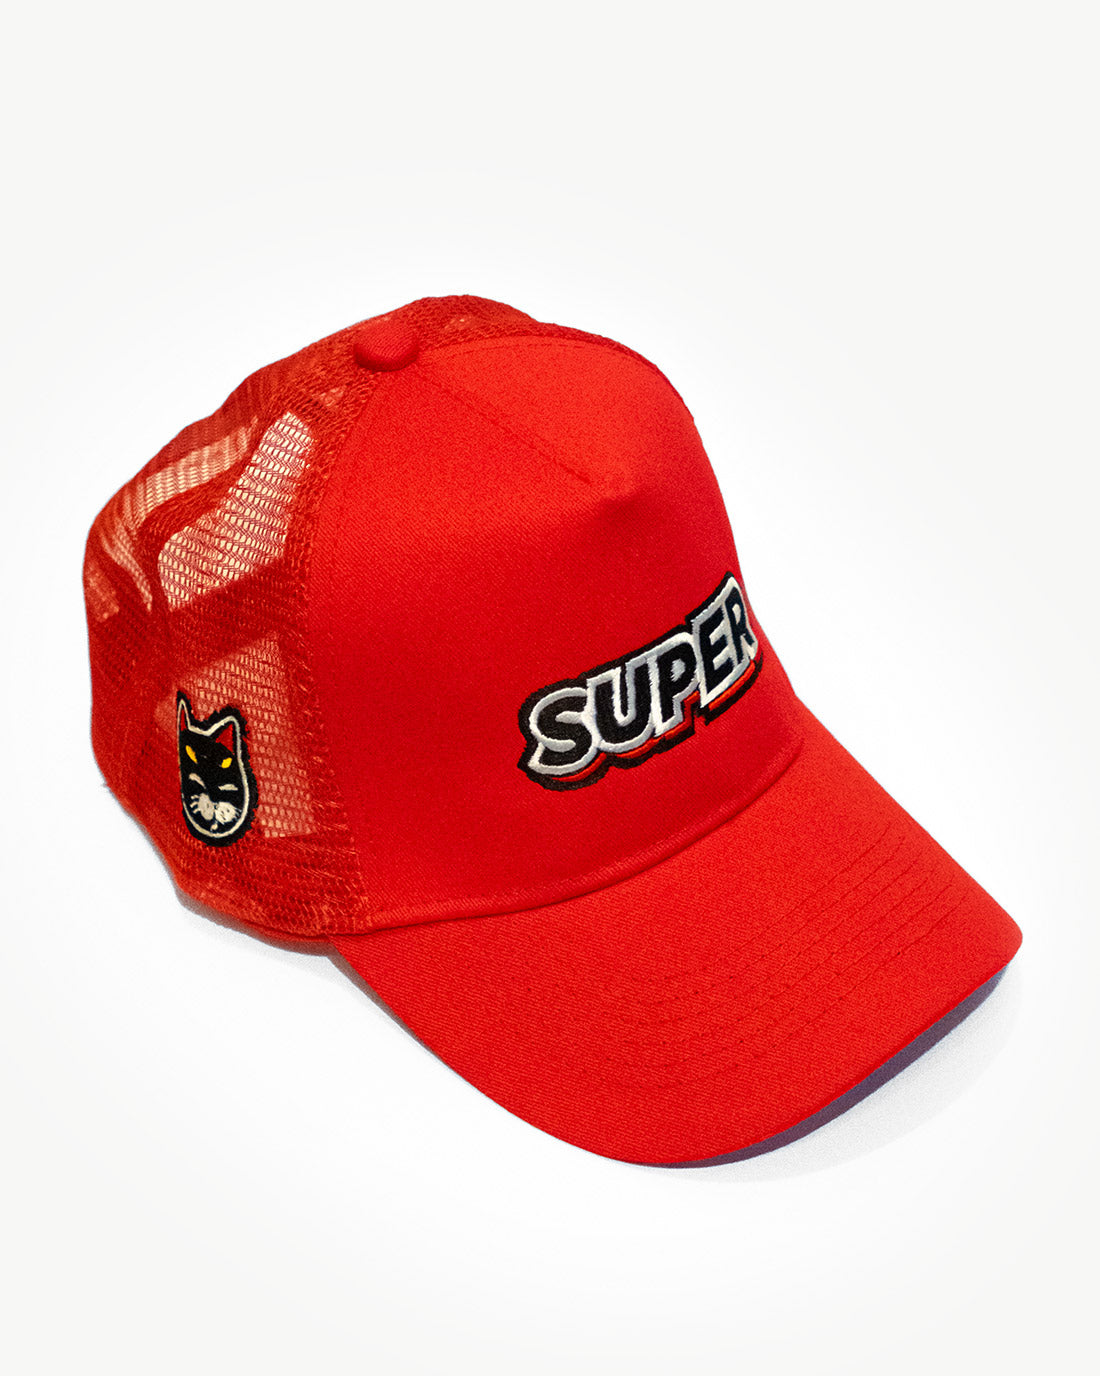 Front side of a super red mesh snapback hat with cute kitty cat patch.